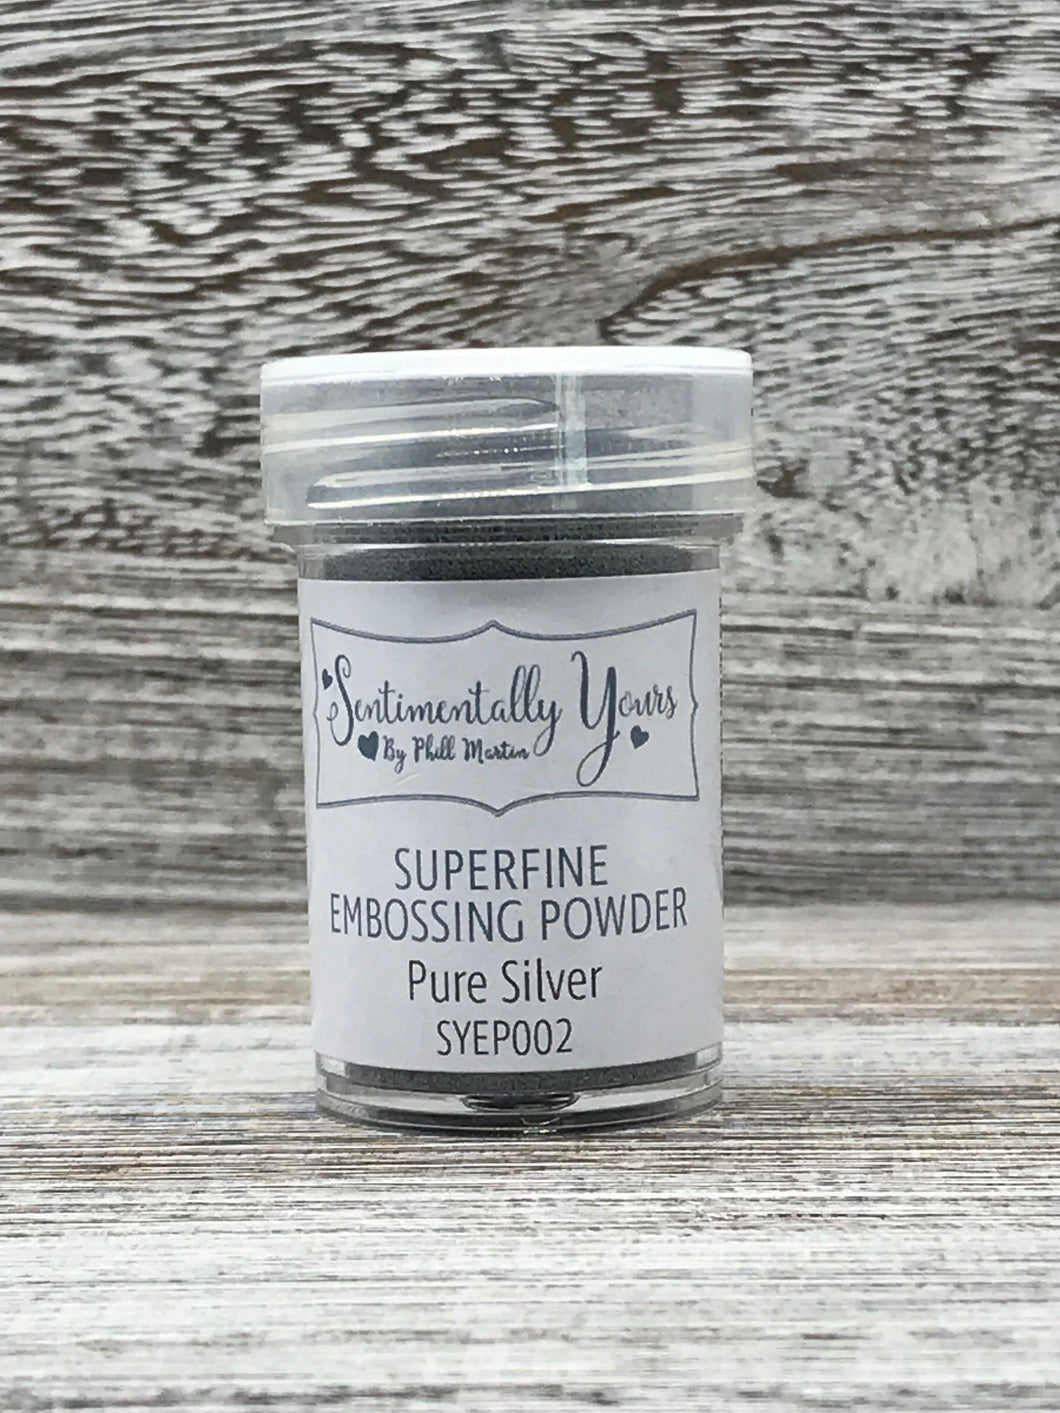 Sentimentally Yours Superfine Embossing Powder - Pure Silver